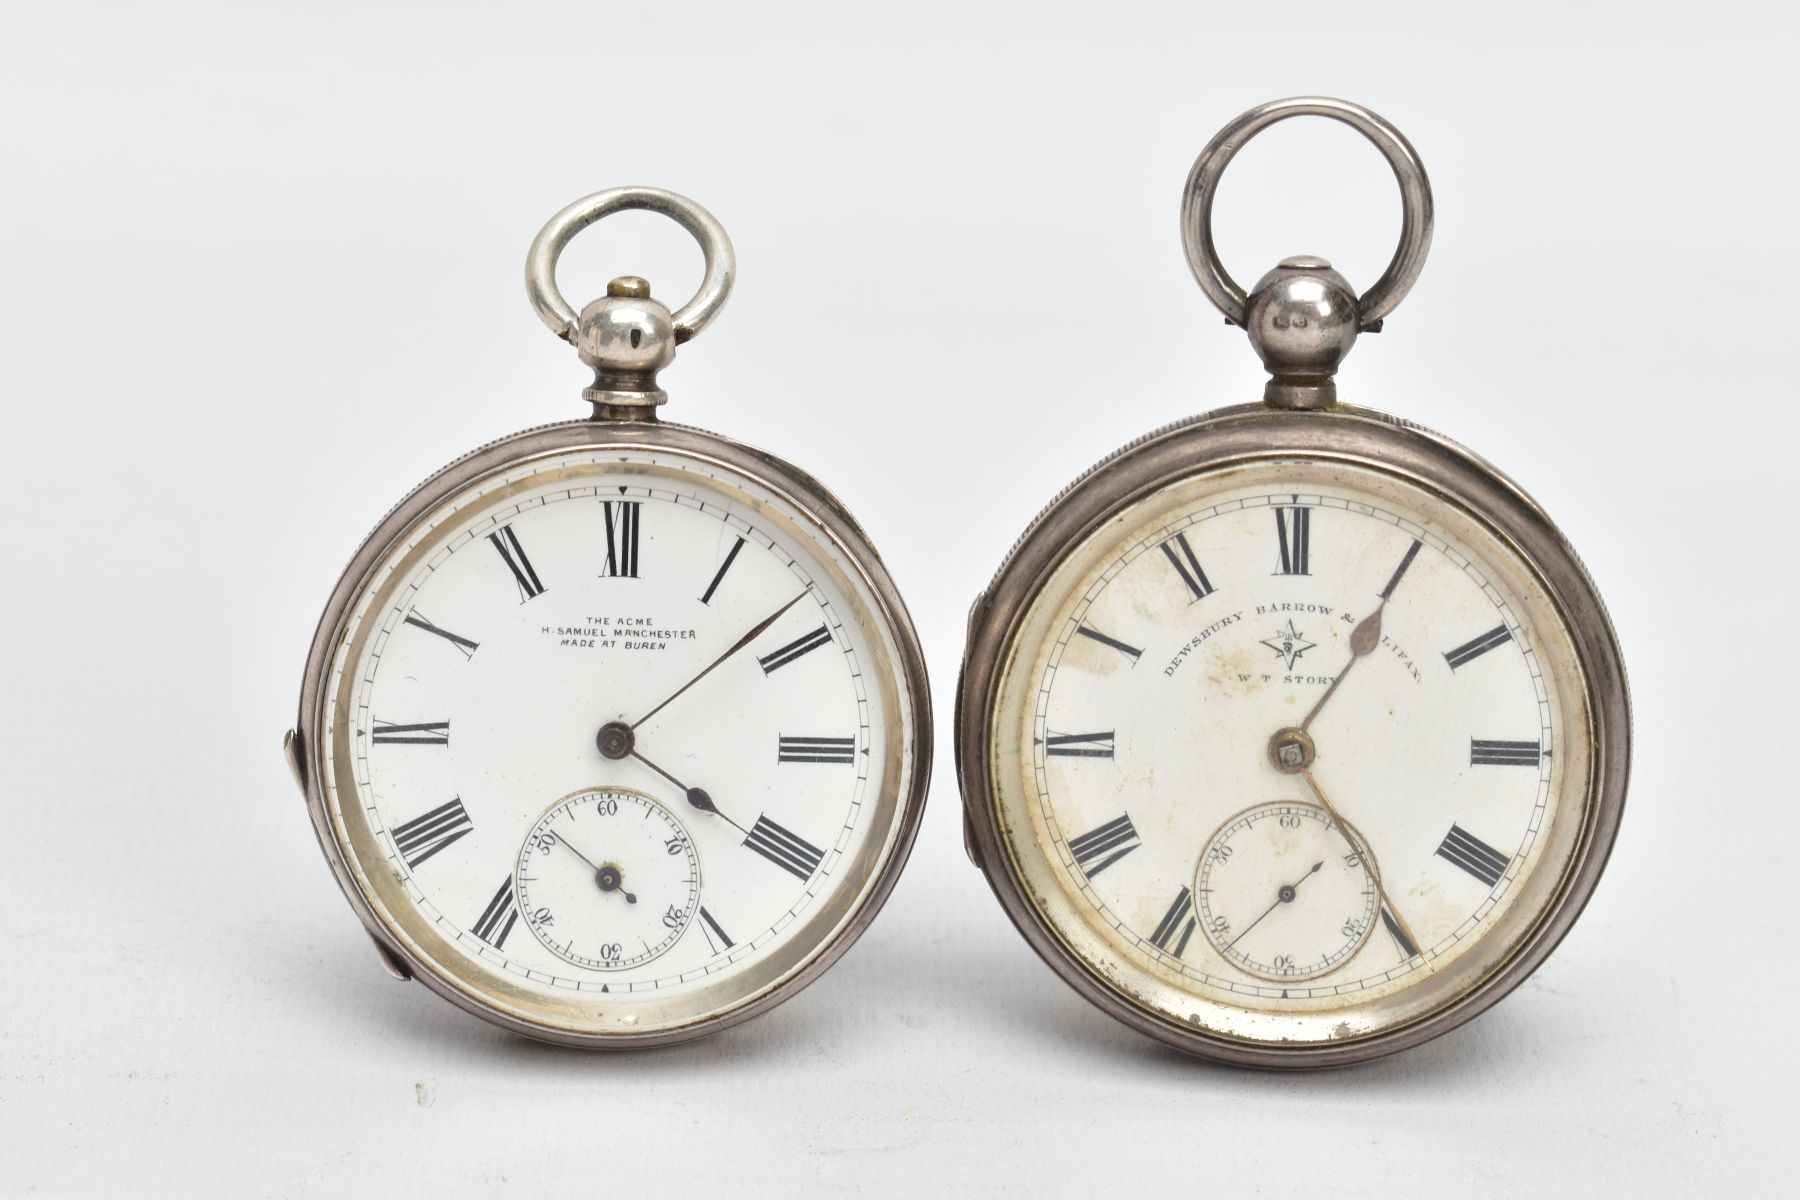 TWO SILVER OPEN FACE POCKET WATCHES, the first with a round white dial signed 'The ACME Samuel,